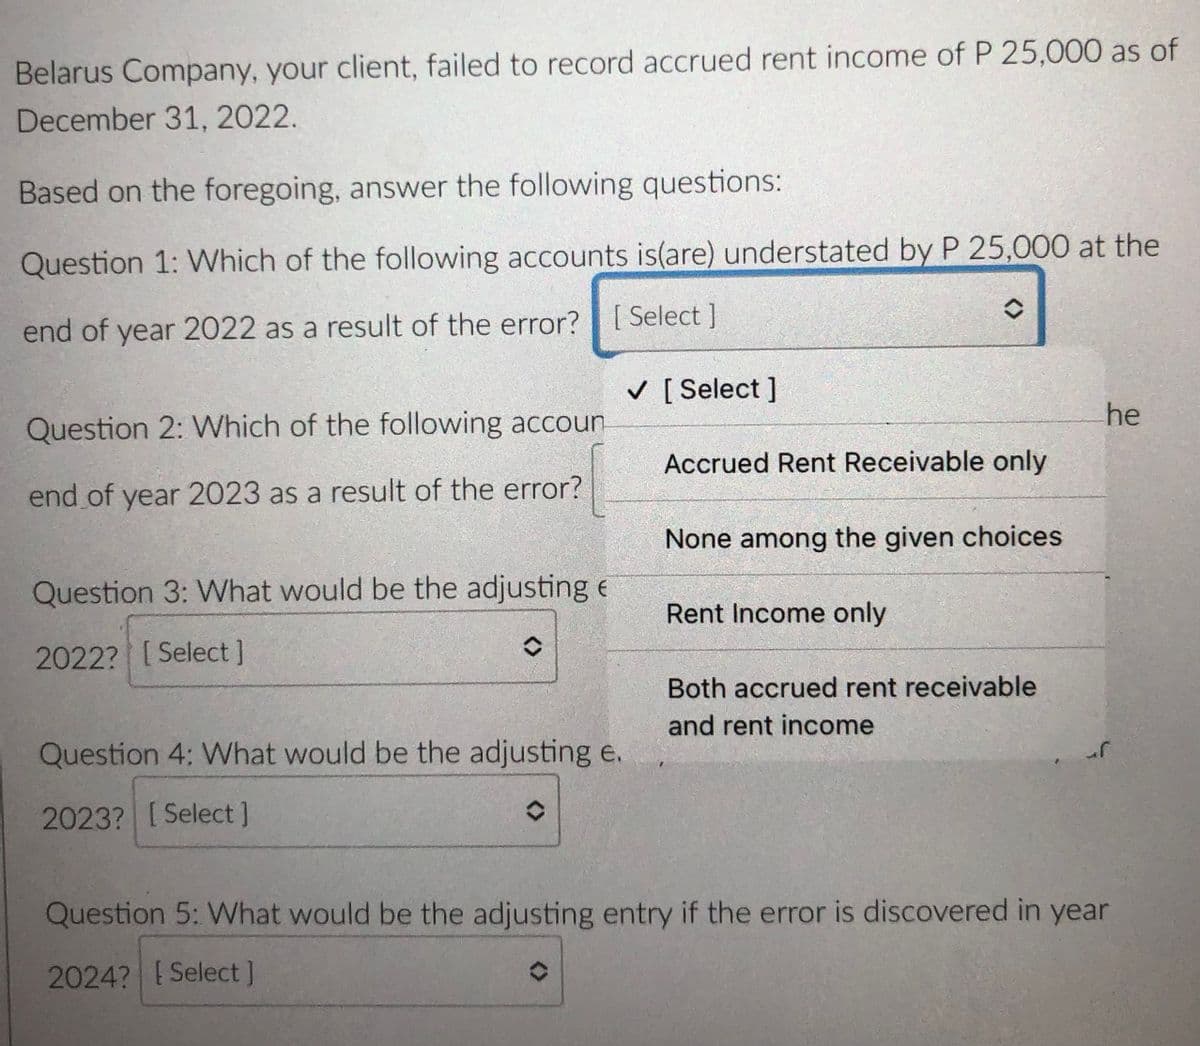 Belarus Company, your client, failed to record accrued rent income of P 25,000 as of
December 31, 2022.
Based on the foregoing, answer the following questions:
Question 1: Which of the following accounts is(are) understated by P 25,000 at the
end of year 2022 as a result of the error? |[ Select ]
V [ Select ]
he
Question 2: Which of the following accoun
Accrued Rent Receivable only
end of year 2023 as a result of the error?
None among the given choices
Question 3: What would be the adjusting e
Rent Income only
2022? [Select]
Both accrued rent receivable
and rent income
Question 4: What would be the adjusting e.
2023? [Select]
Question 5: What would be the adjusting entry if the error is discovered in year
2024? Select]
